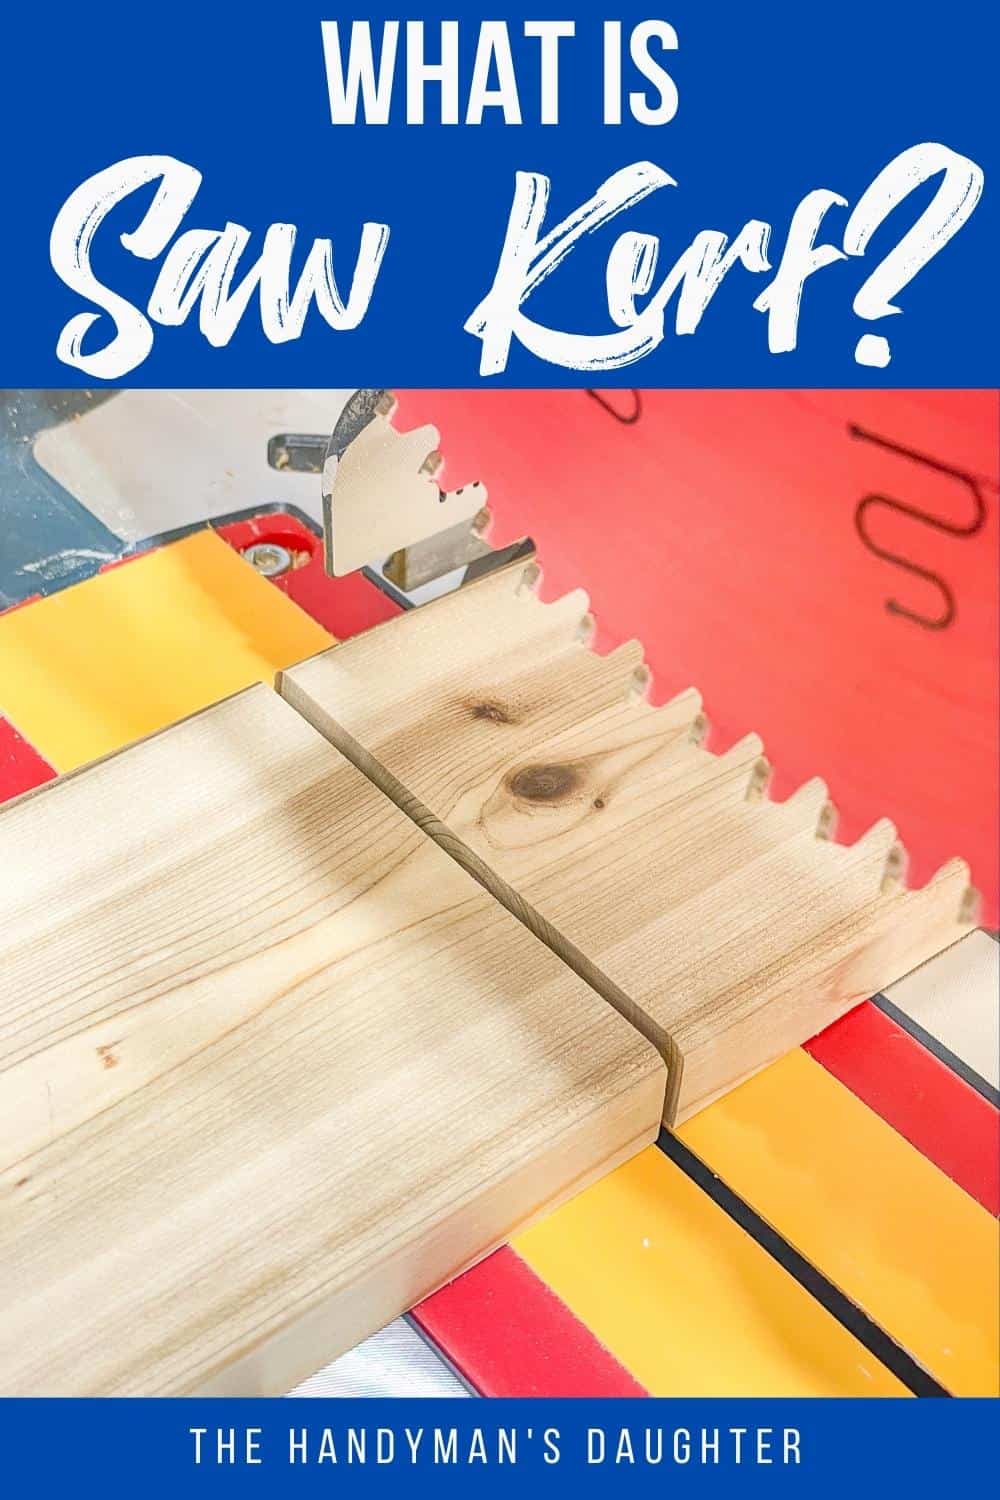 what is saw kerf? with image of miter saw and board cut in half